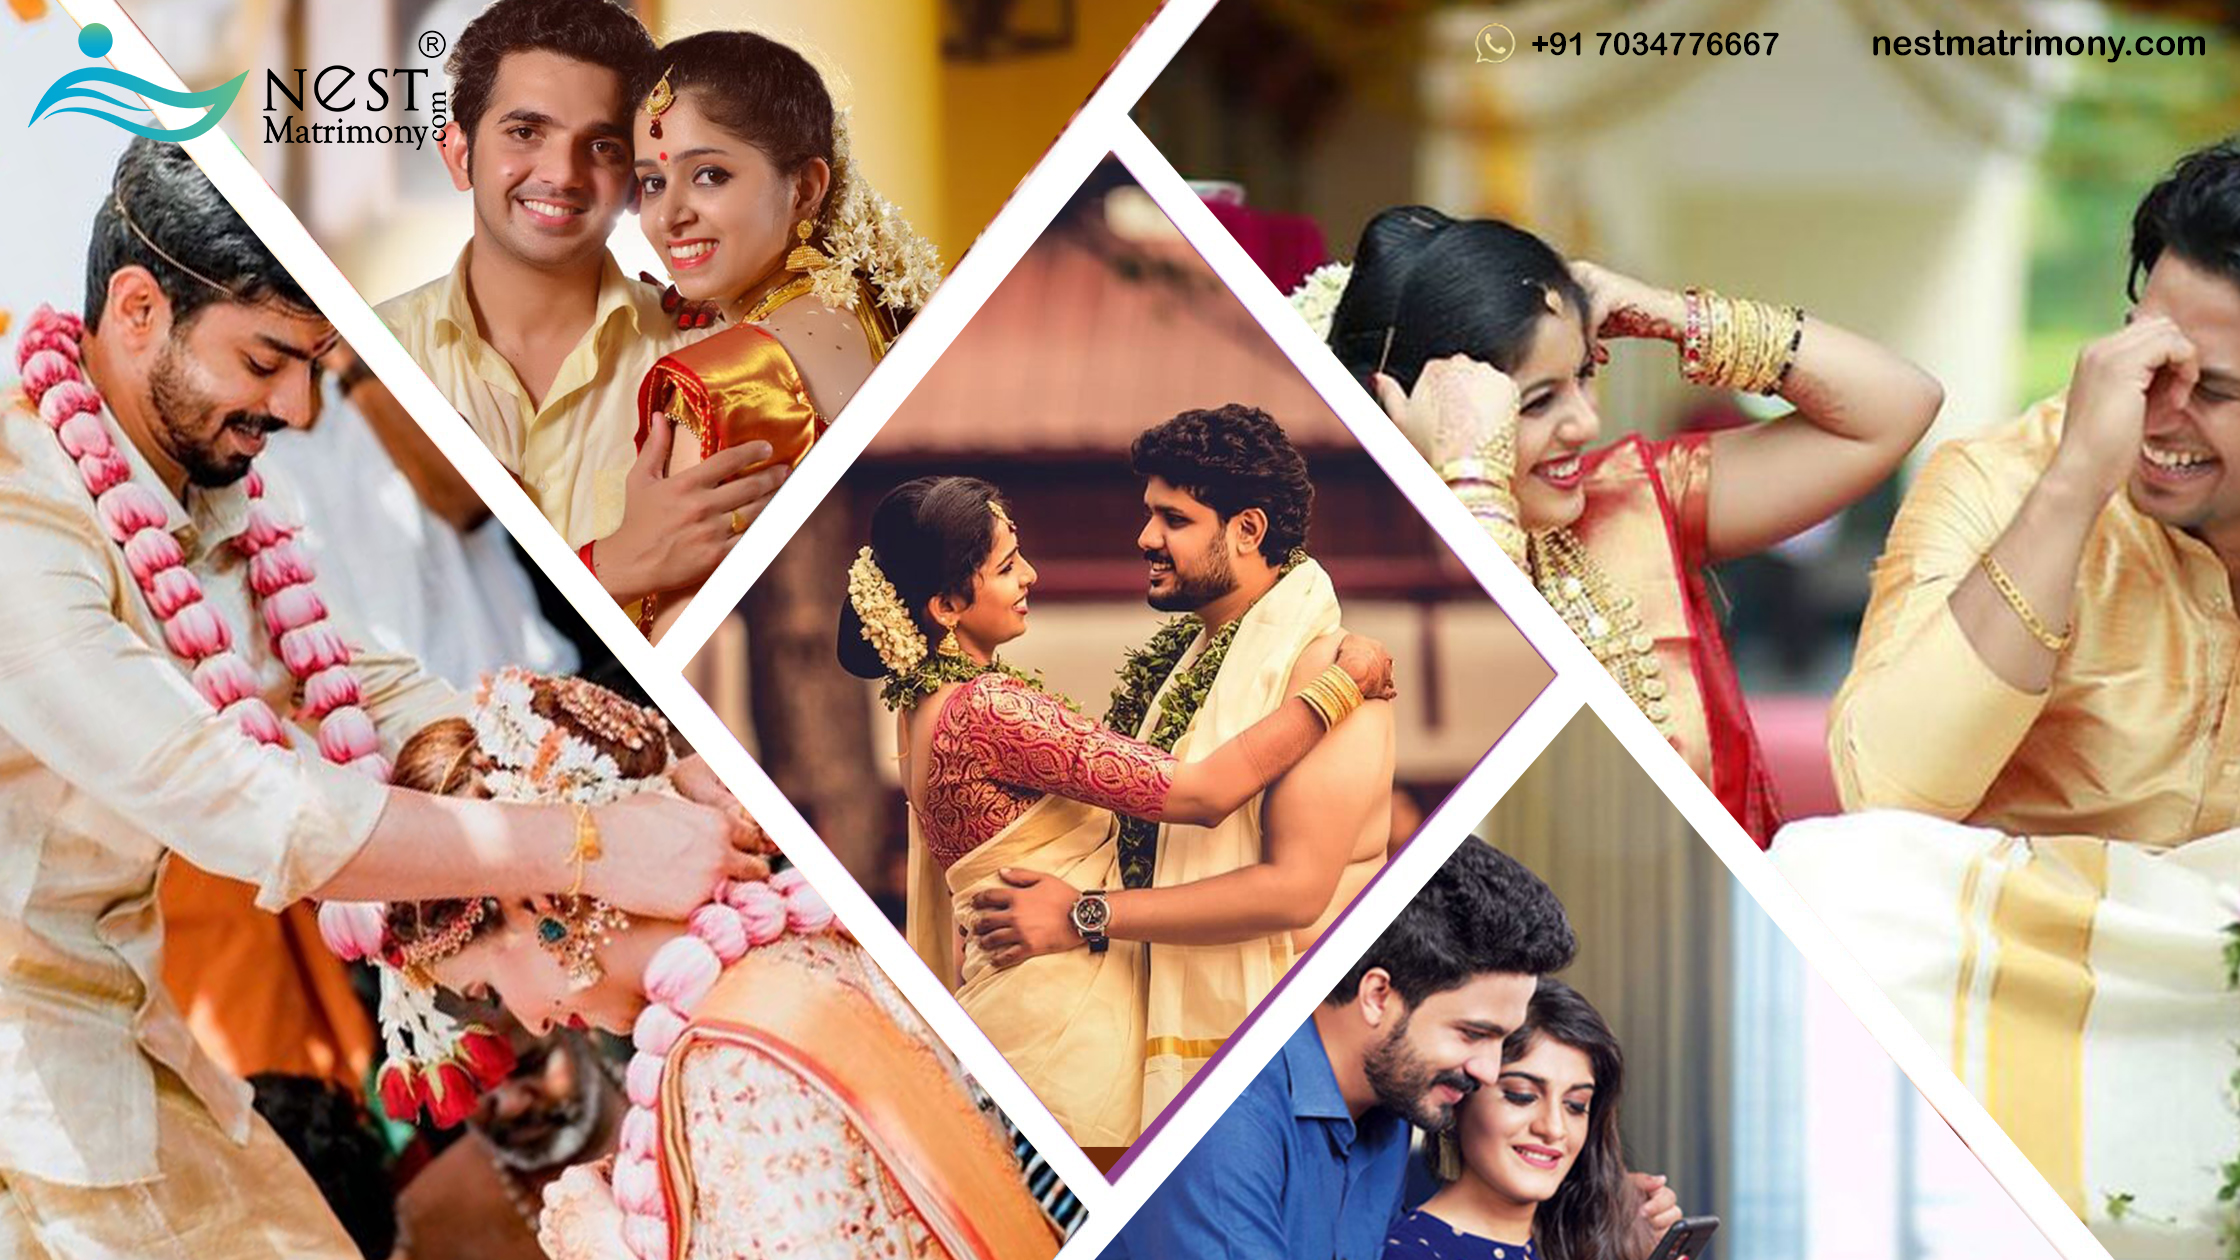 Which Is The Best Matrimony For Second Marriage In Kerala Nestmatrimony Blog